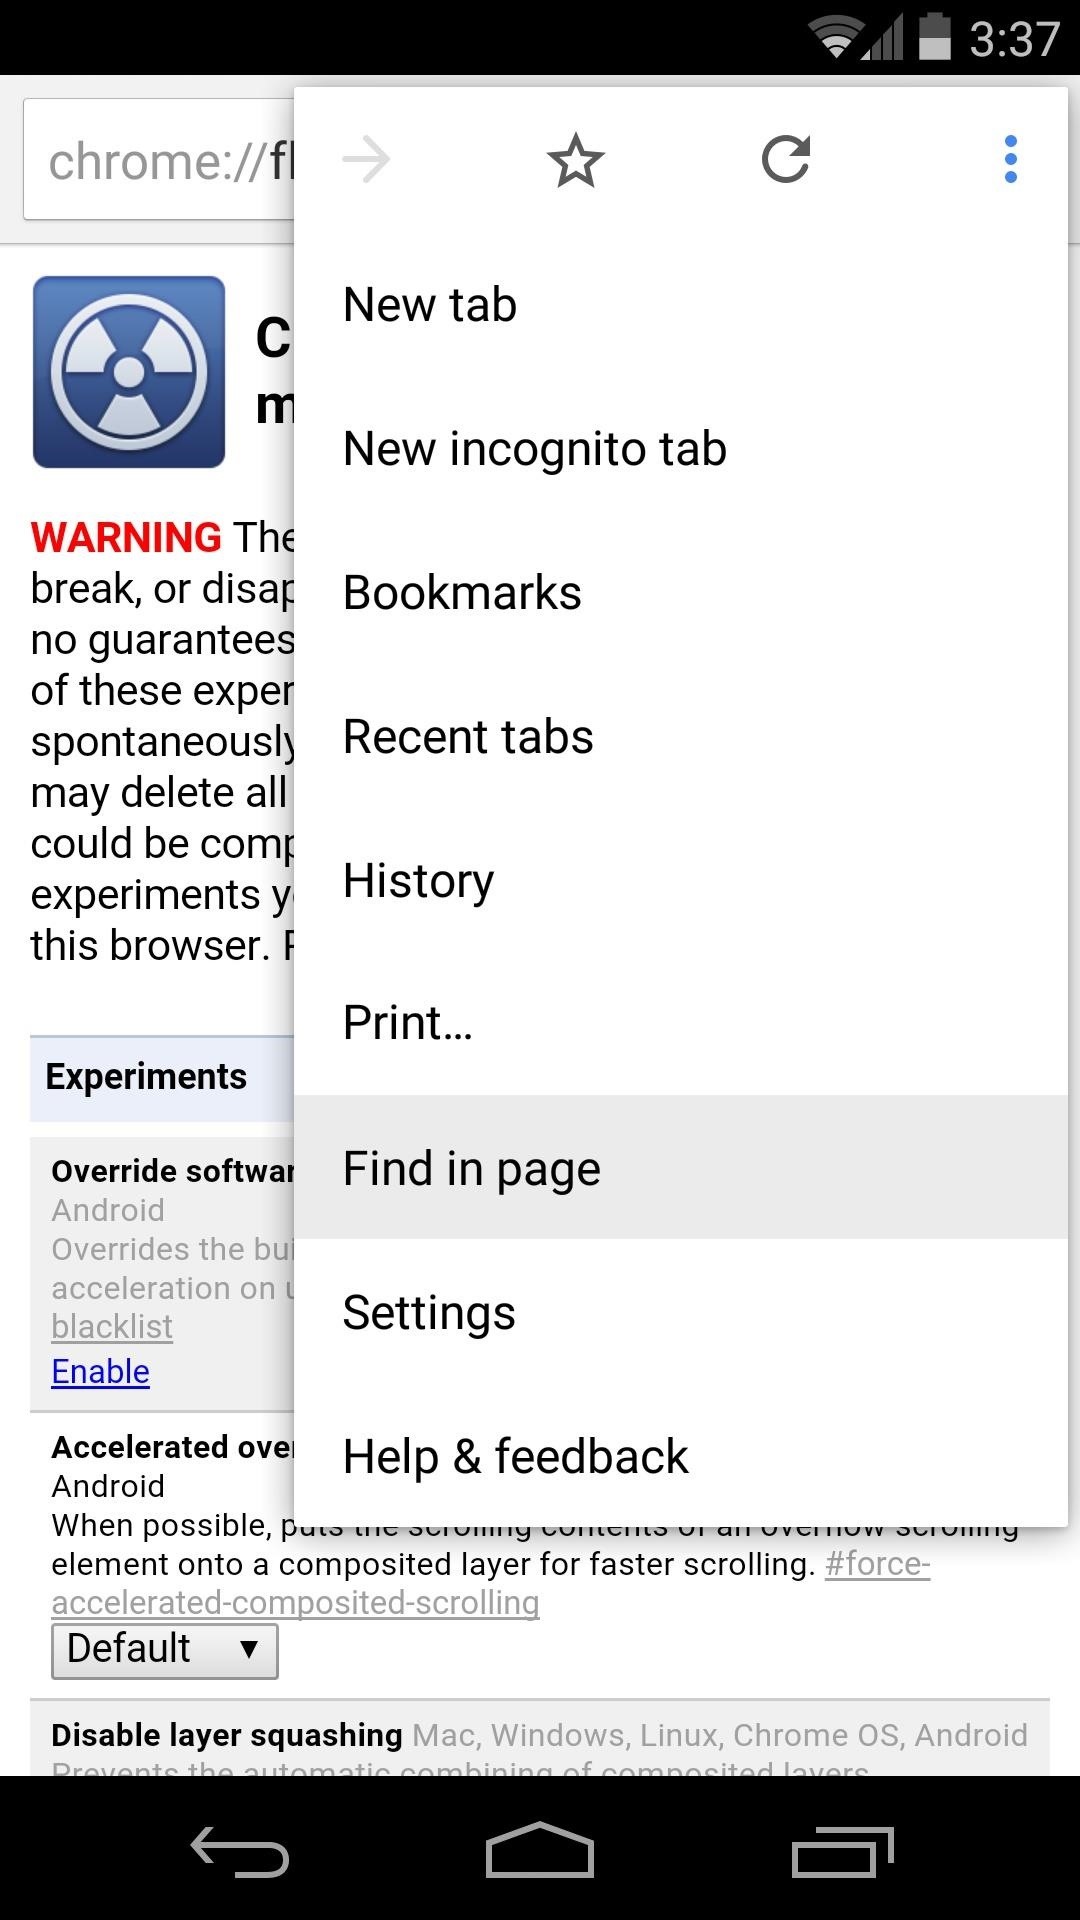 Get Instant Answers Right from Chrome's Search Bar